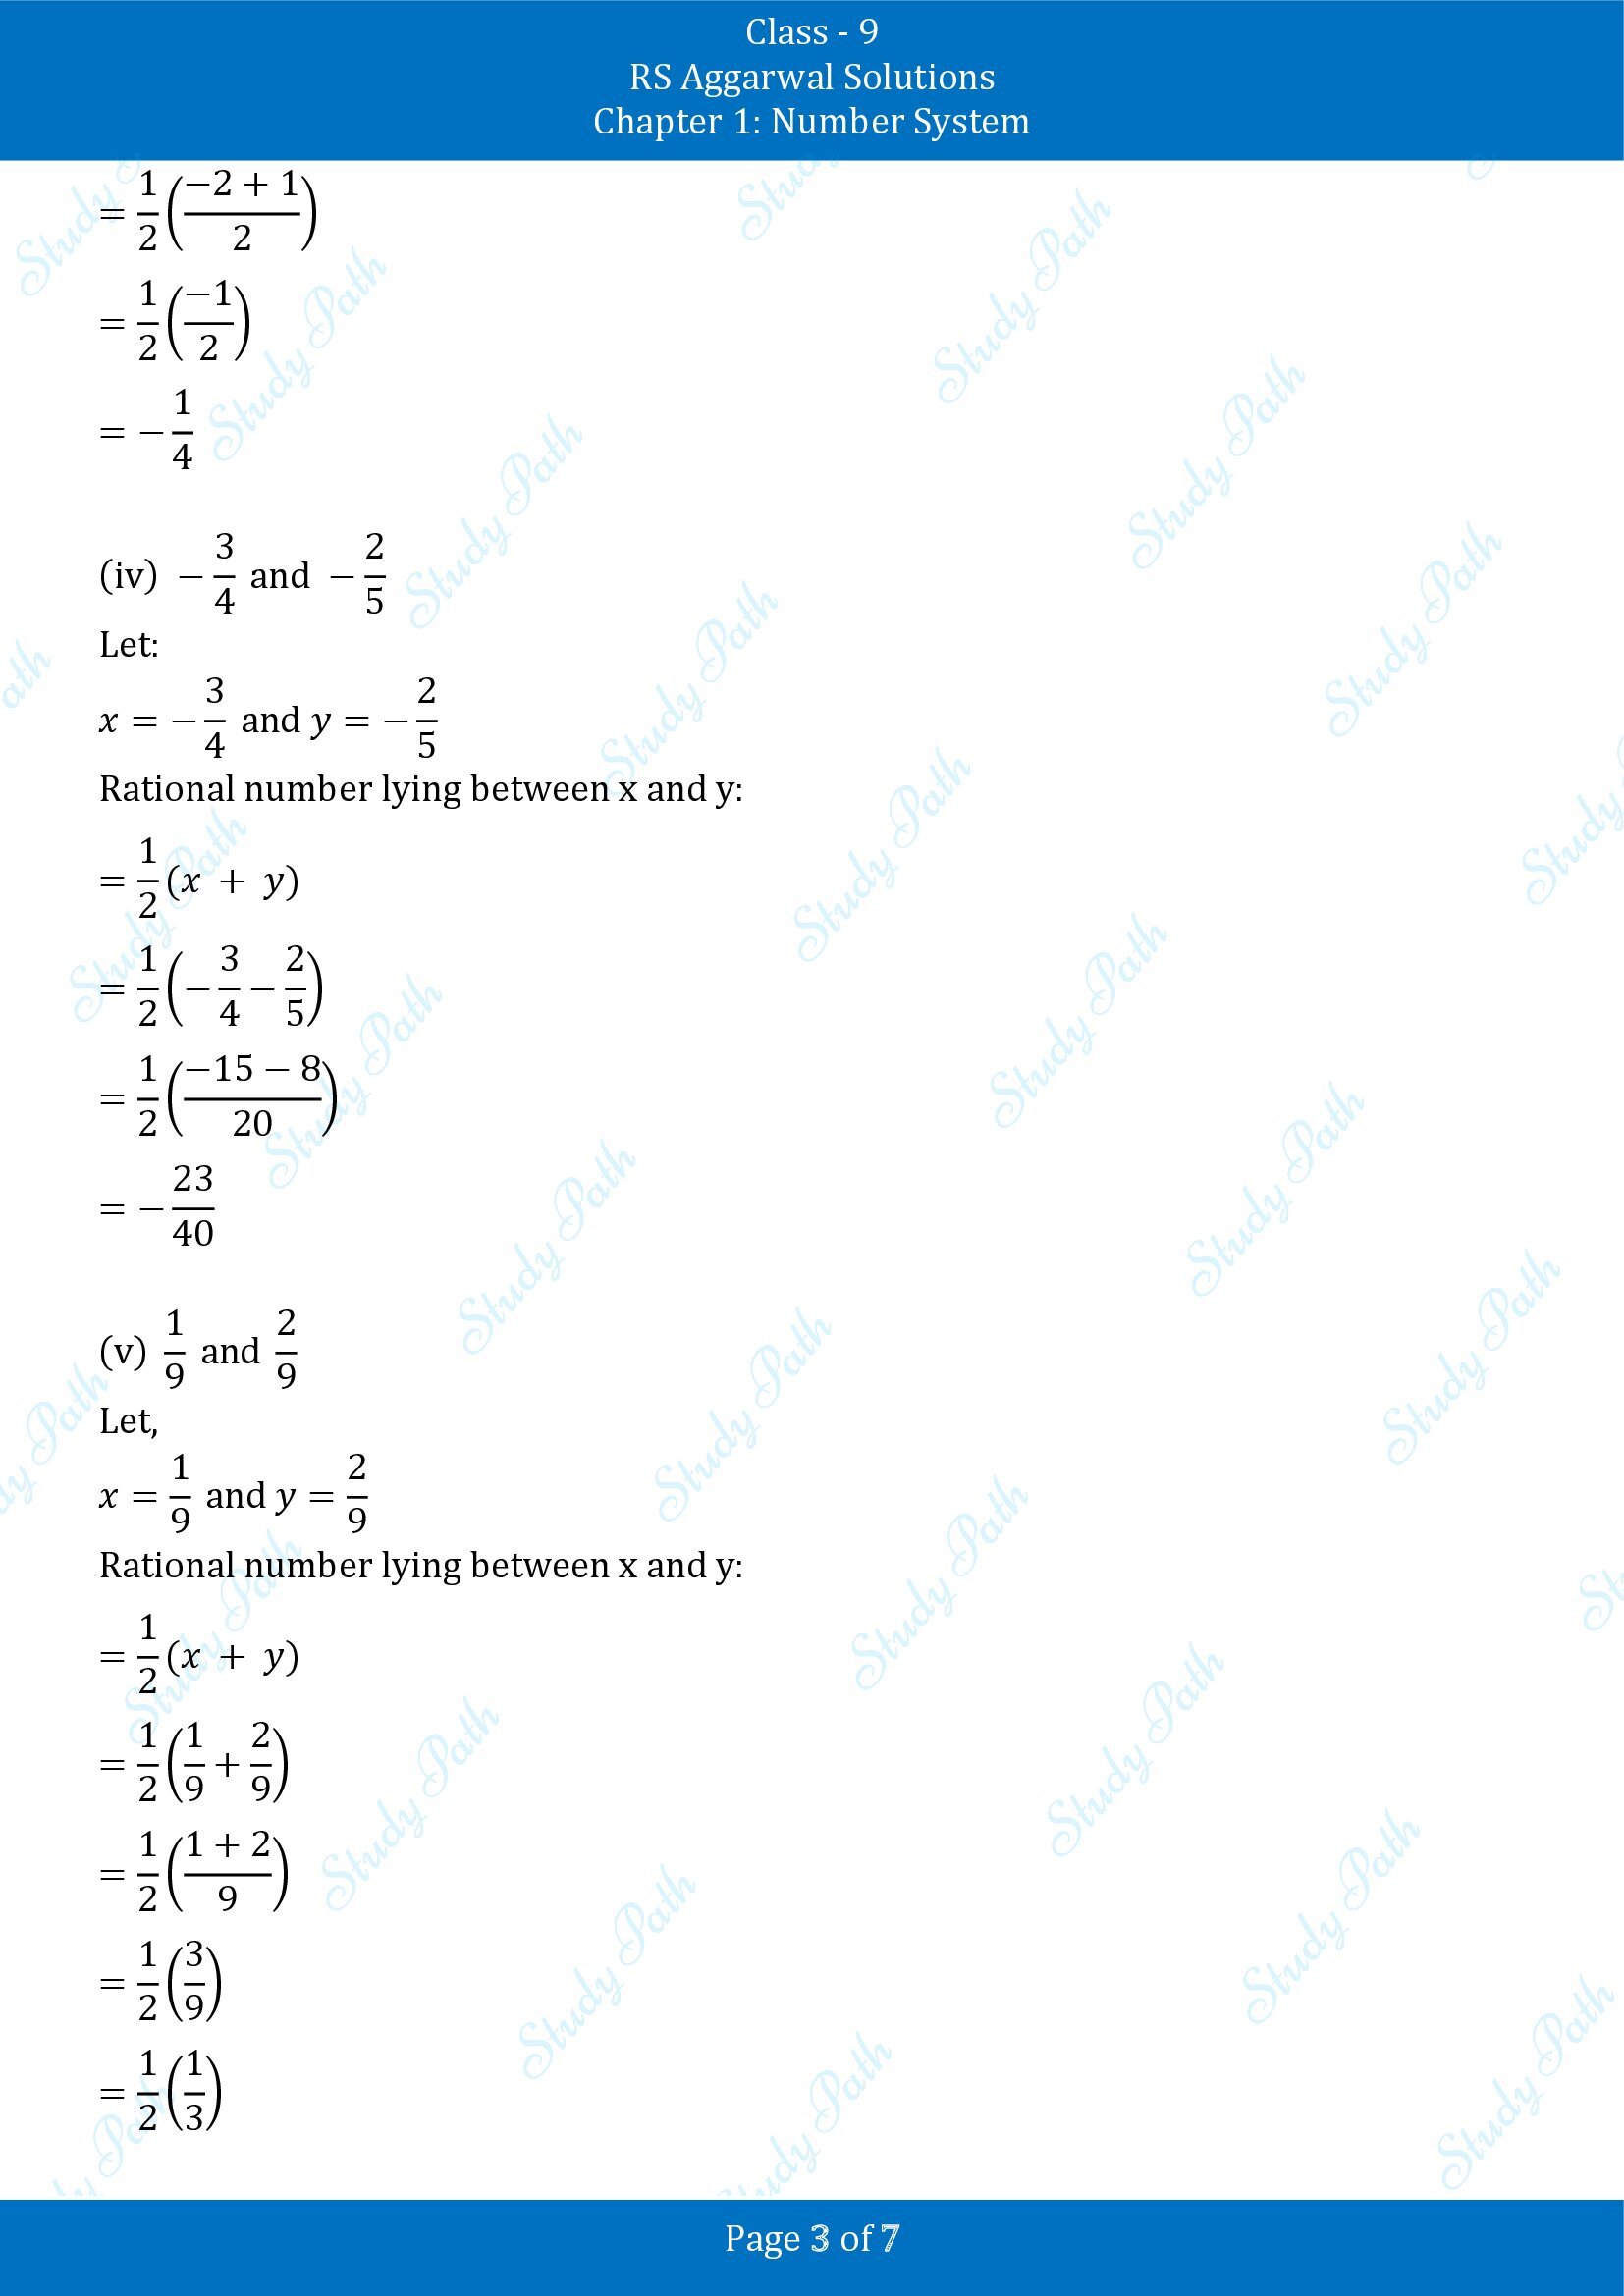 RS Aggarwal Solutions Class 9 Chapter 1 Number System Exercise 1A 00003